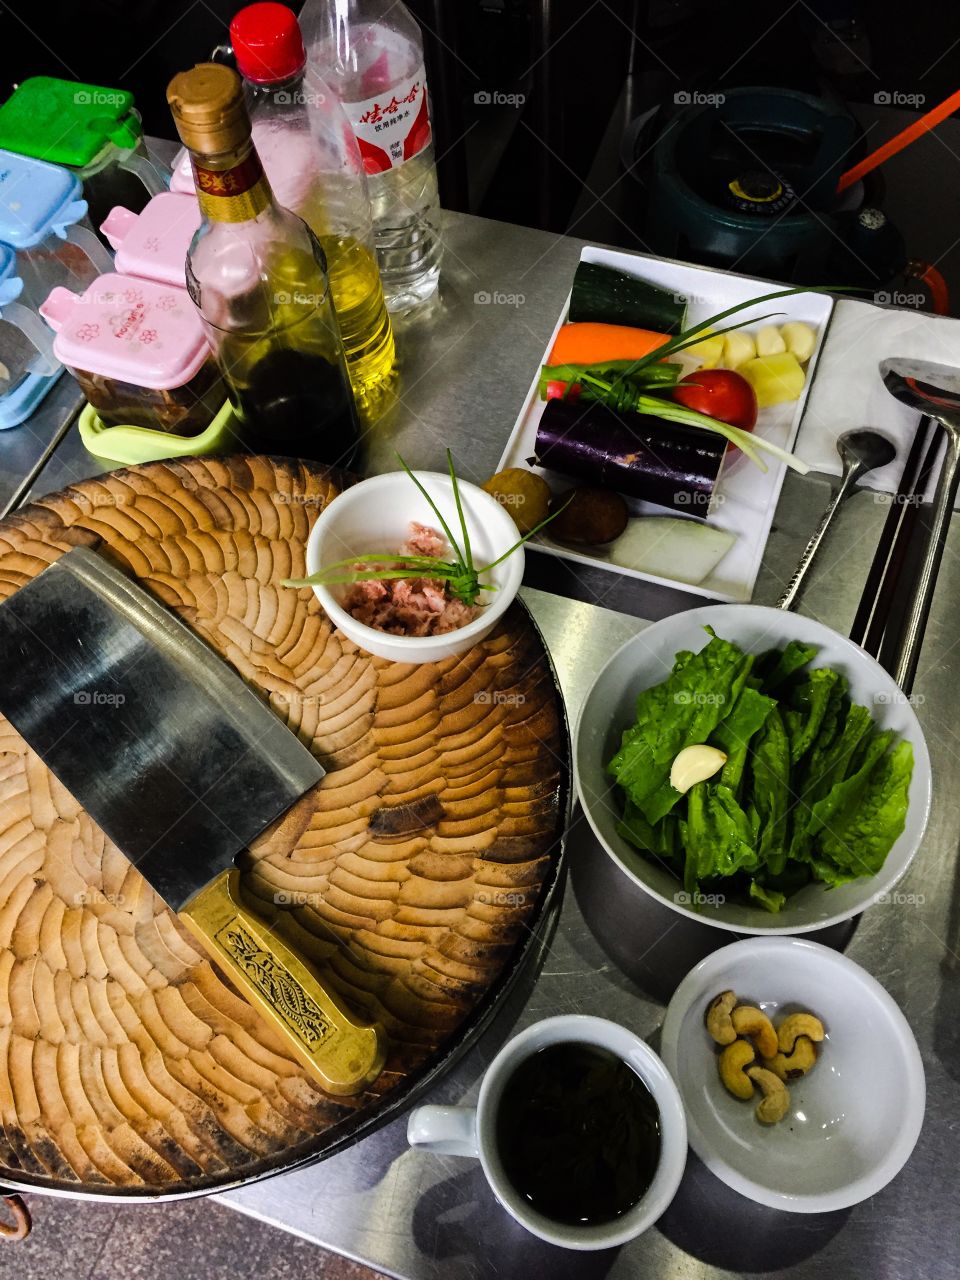 Cooking class near Guilin.  We prepared dishes such as eggplant, beer battered fish, and dumplings -- all dishes native to the region.